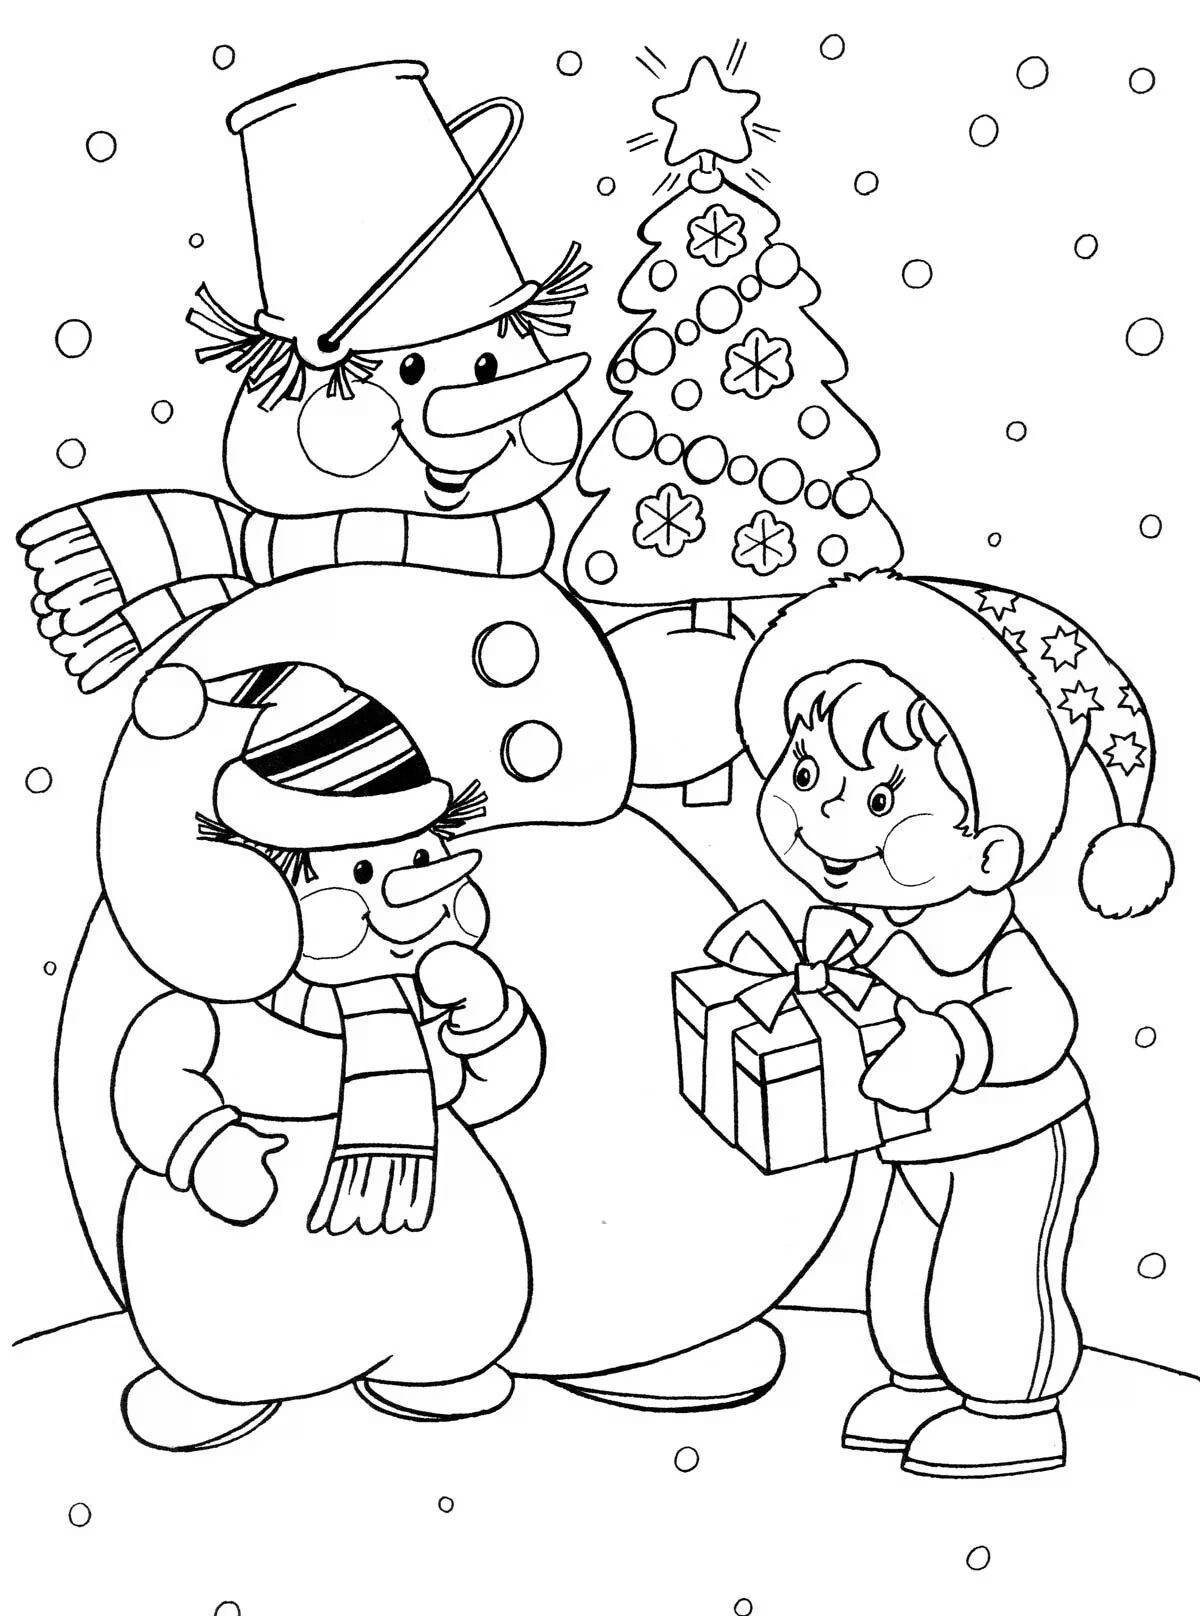 Animated children's Christmas coloring book